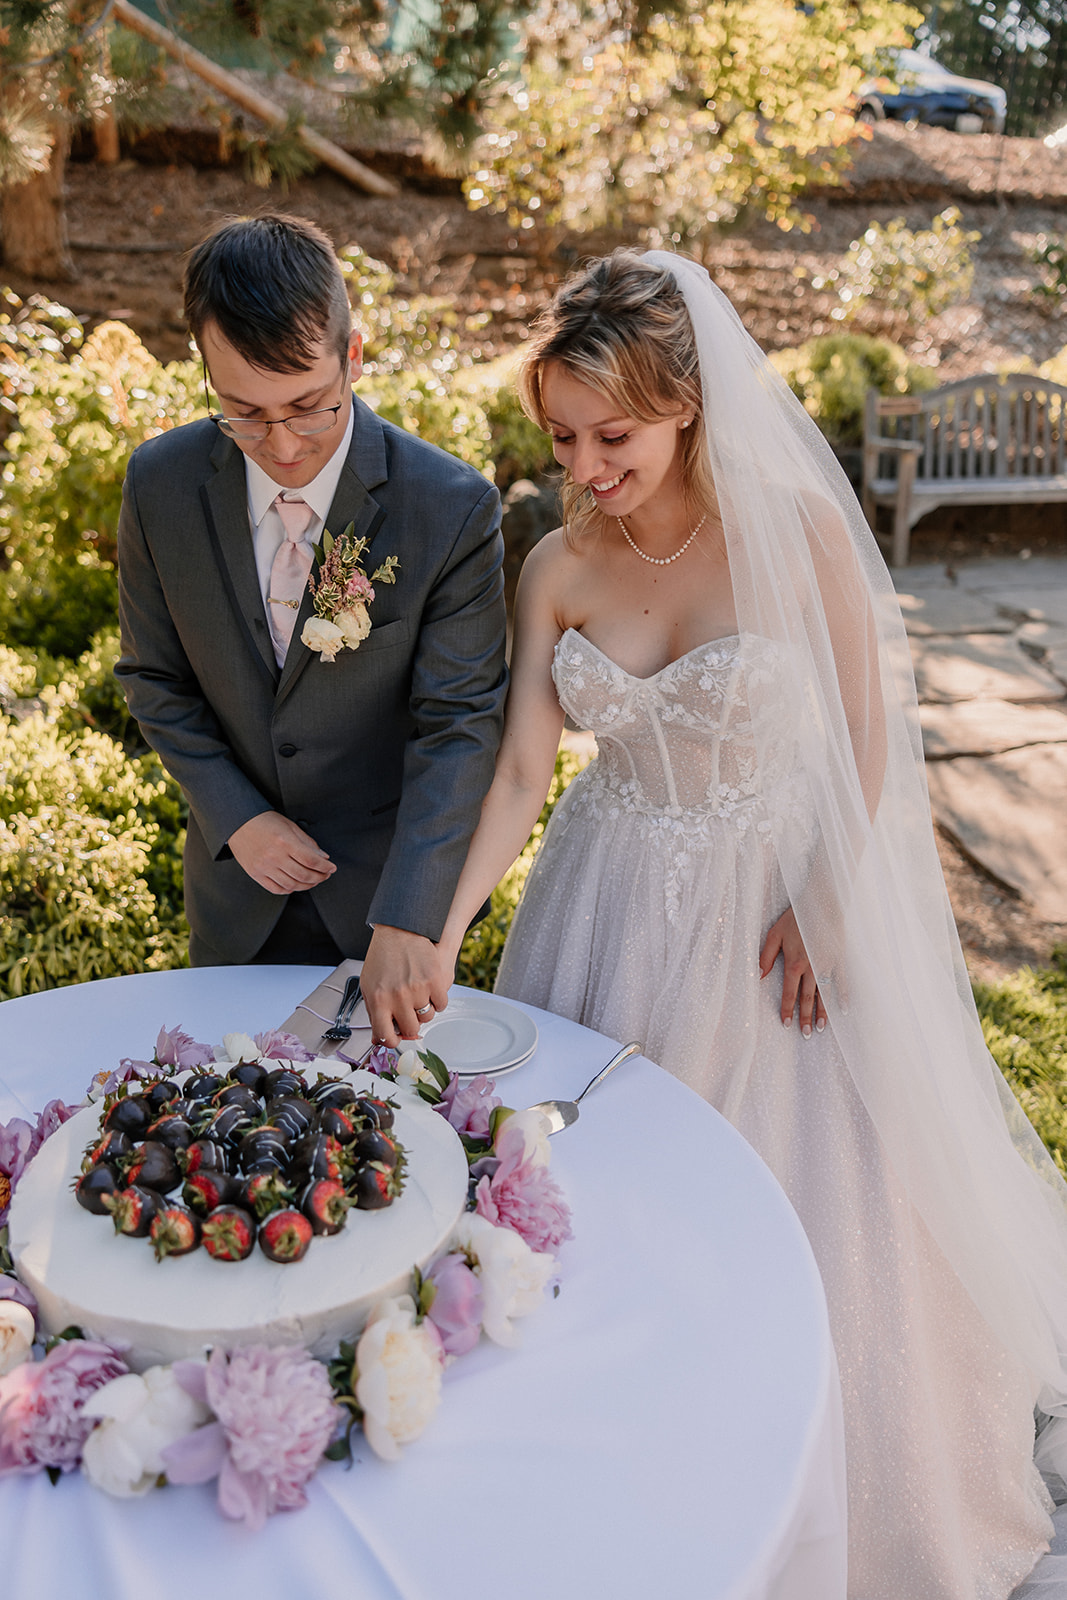 A groom in a gray suit is feeding cake to a bride in a white wedding dress and veil. They are standing outdoors near a table with flowers and cake.